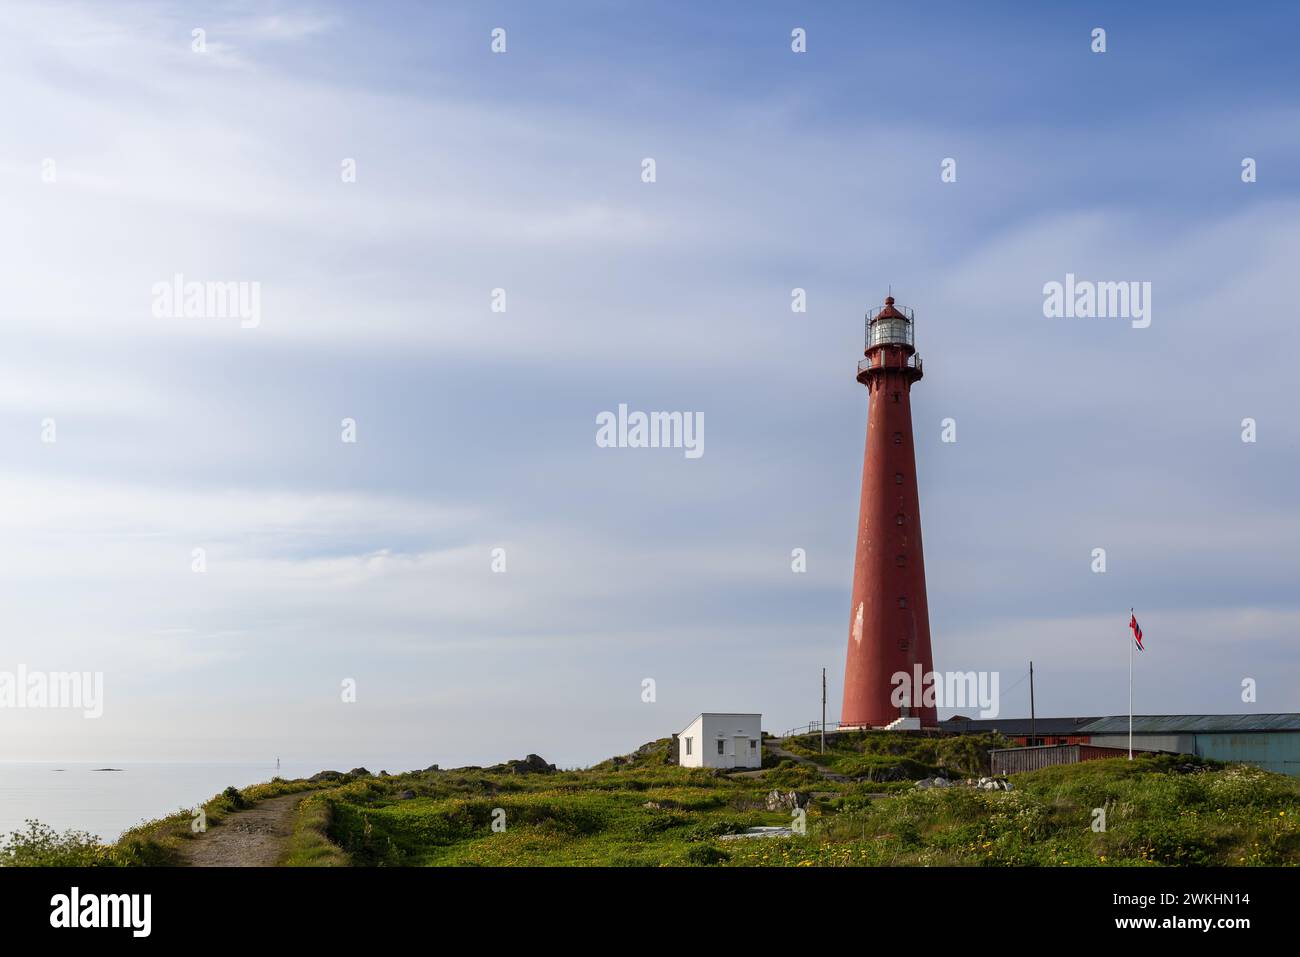 A serene summer day at Andenes Lighthouse in Norway, with the sea in the background and the national flag proudly on display. Stock Photo